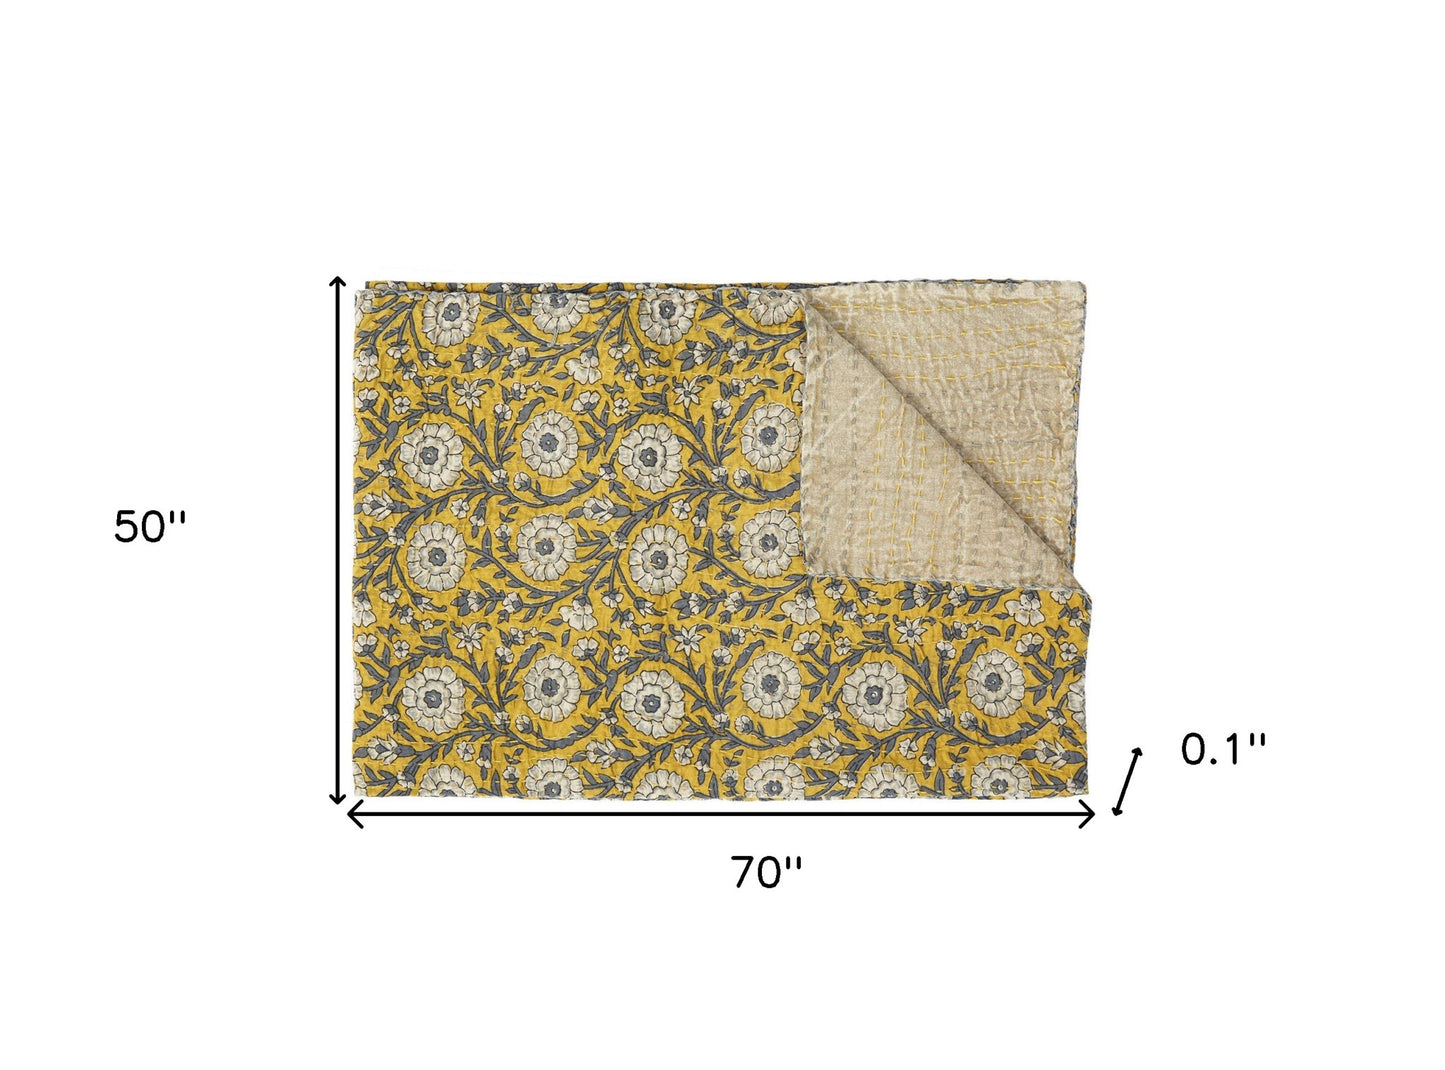 50" X 70" Yellow and Gray Kantha Cotton Floral Throw Blanket